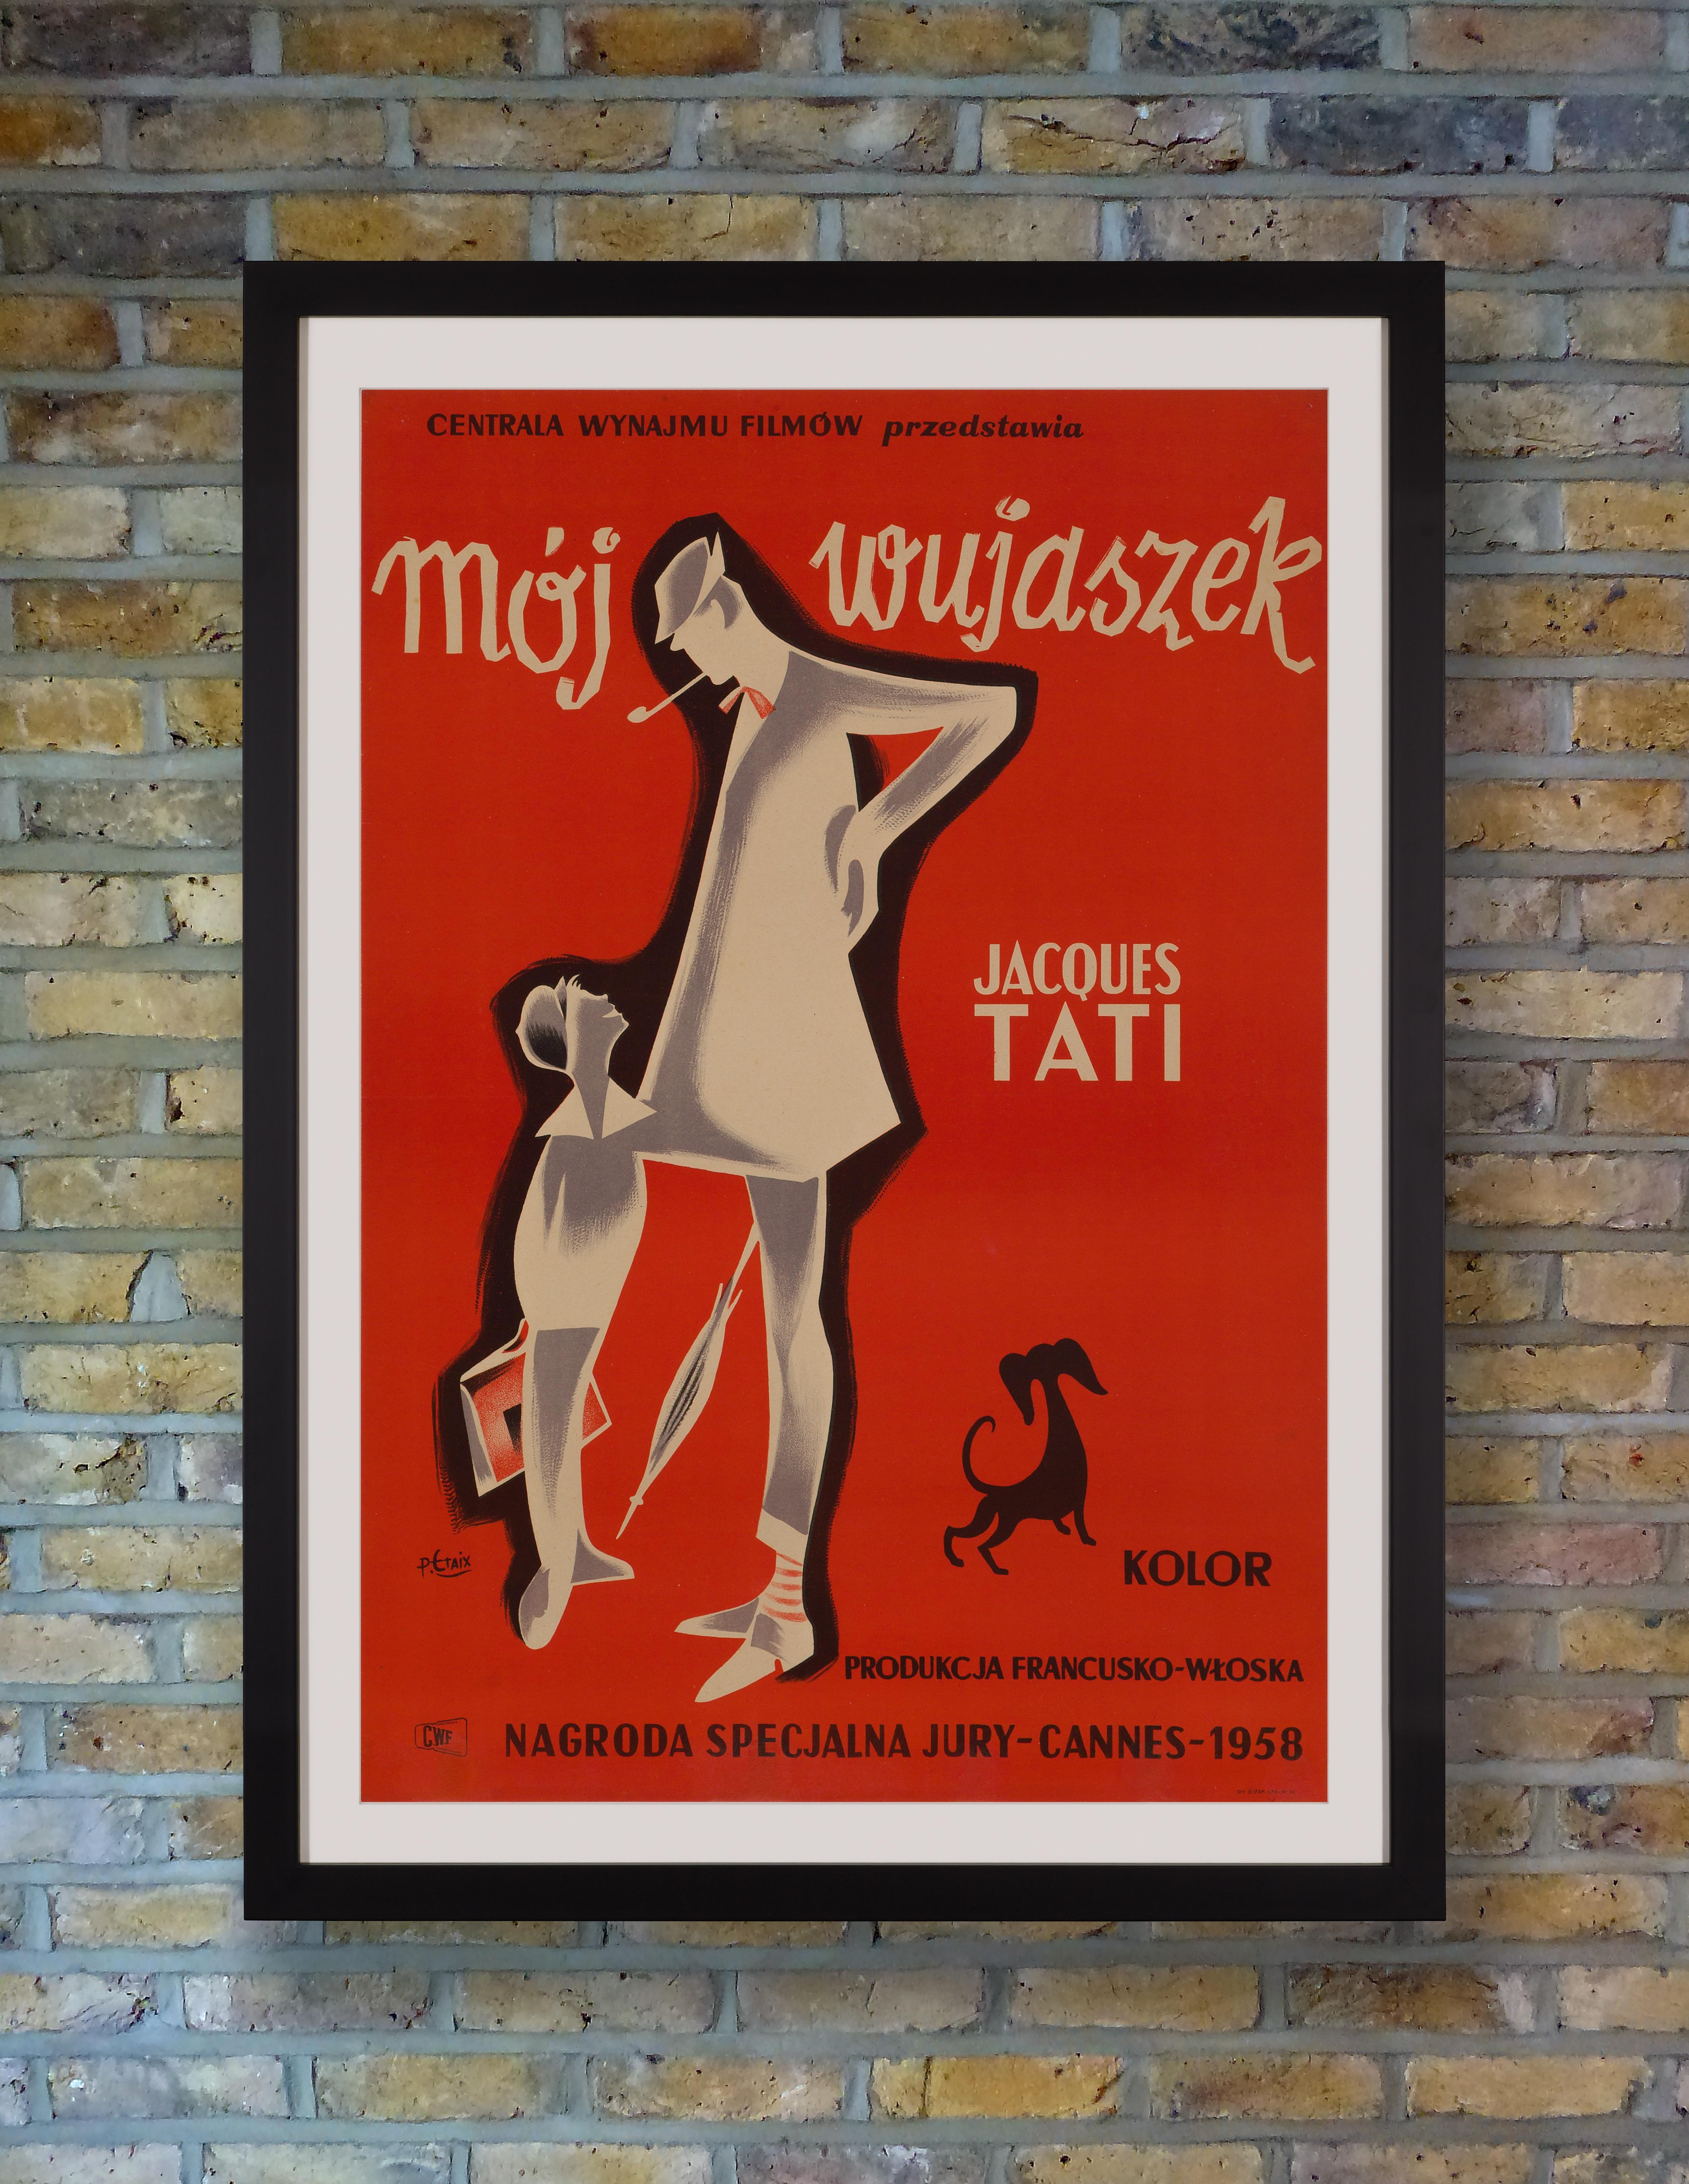 An exceptionally rare poster for the first Polish release of the 1958 Classic French slapstick comedy 'Mon Oncle,' written, directed, produced by and starring Jacques Tati as the eccentric hero Monsieur Hulot. Featuring the same superb Pierre Etaix